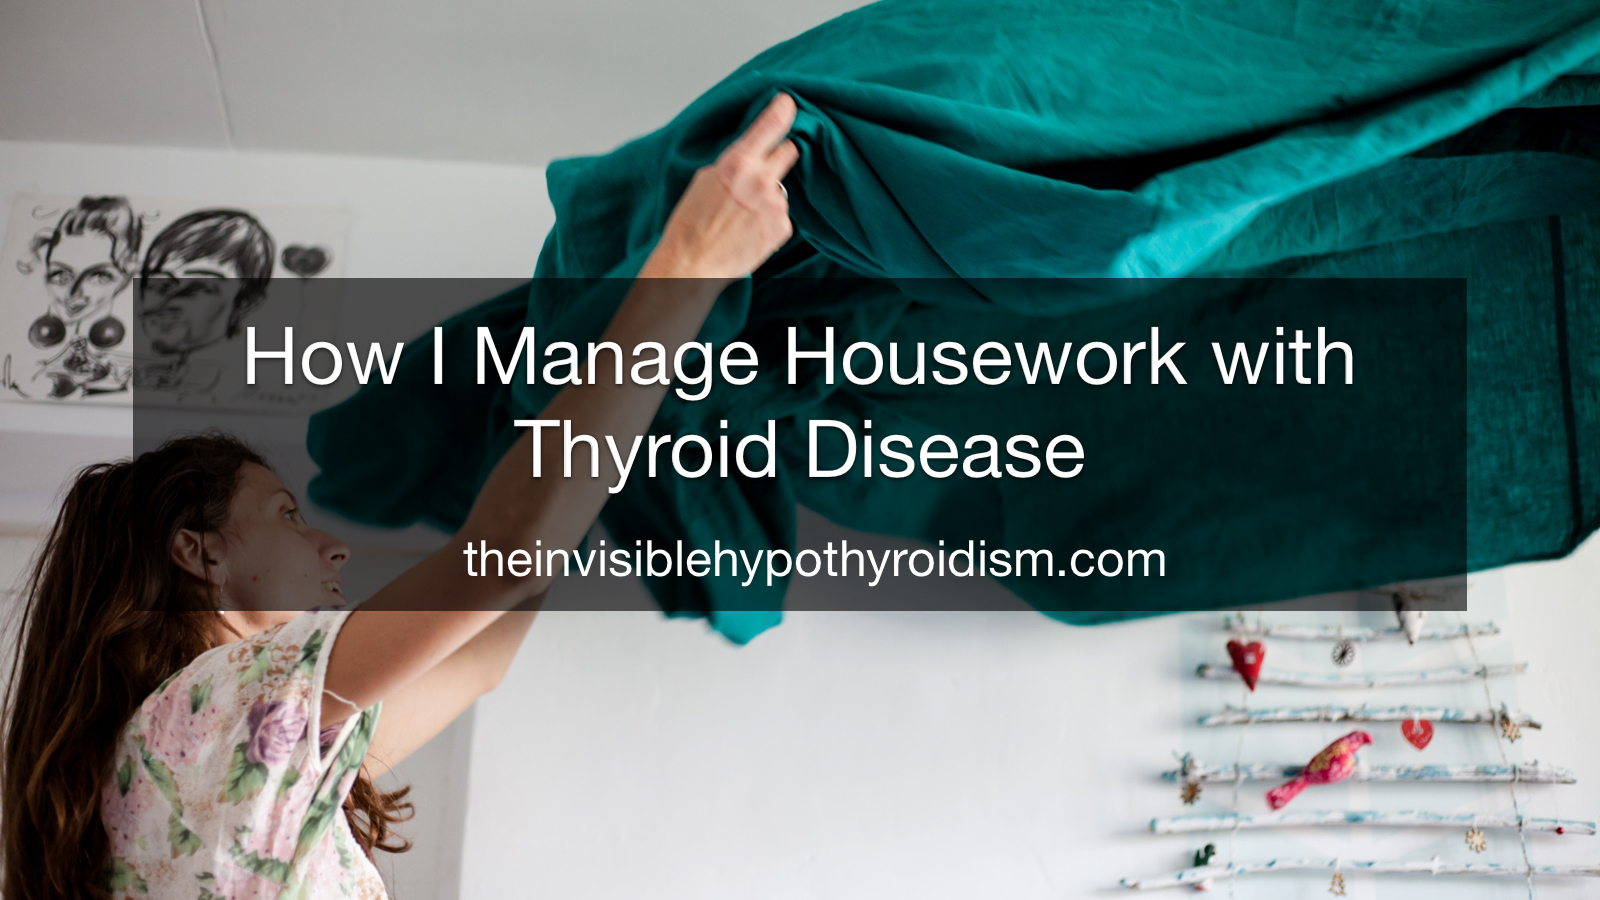 How I Manage Housework with Thyroid Disease